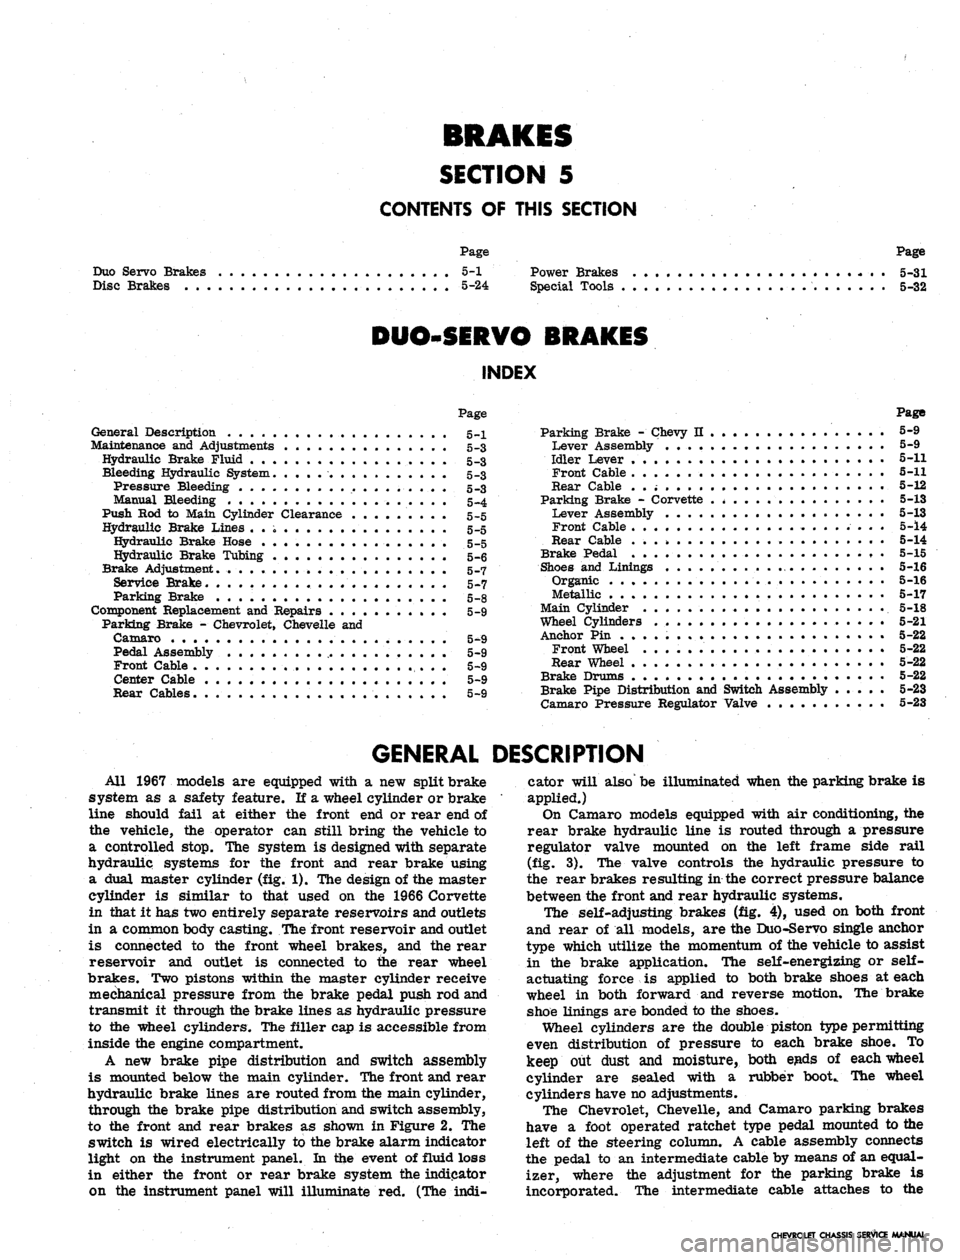 CHEVROLET CAMARO 1967 1.G Chassis Workshop Manual 
BRAKES

SECTION 5

CONTENTS OF THIS SECTION

Duo Servo Brakes

Disc Brakes 
Page

5-1 Power Brakes

5-24 Special Tools 
Page

5-31

5-32

DUO-SERVO BRAKES

INDEX

Page

General Description 5-1

Maint